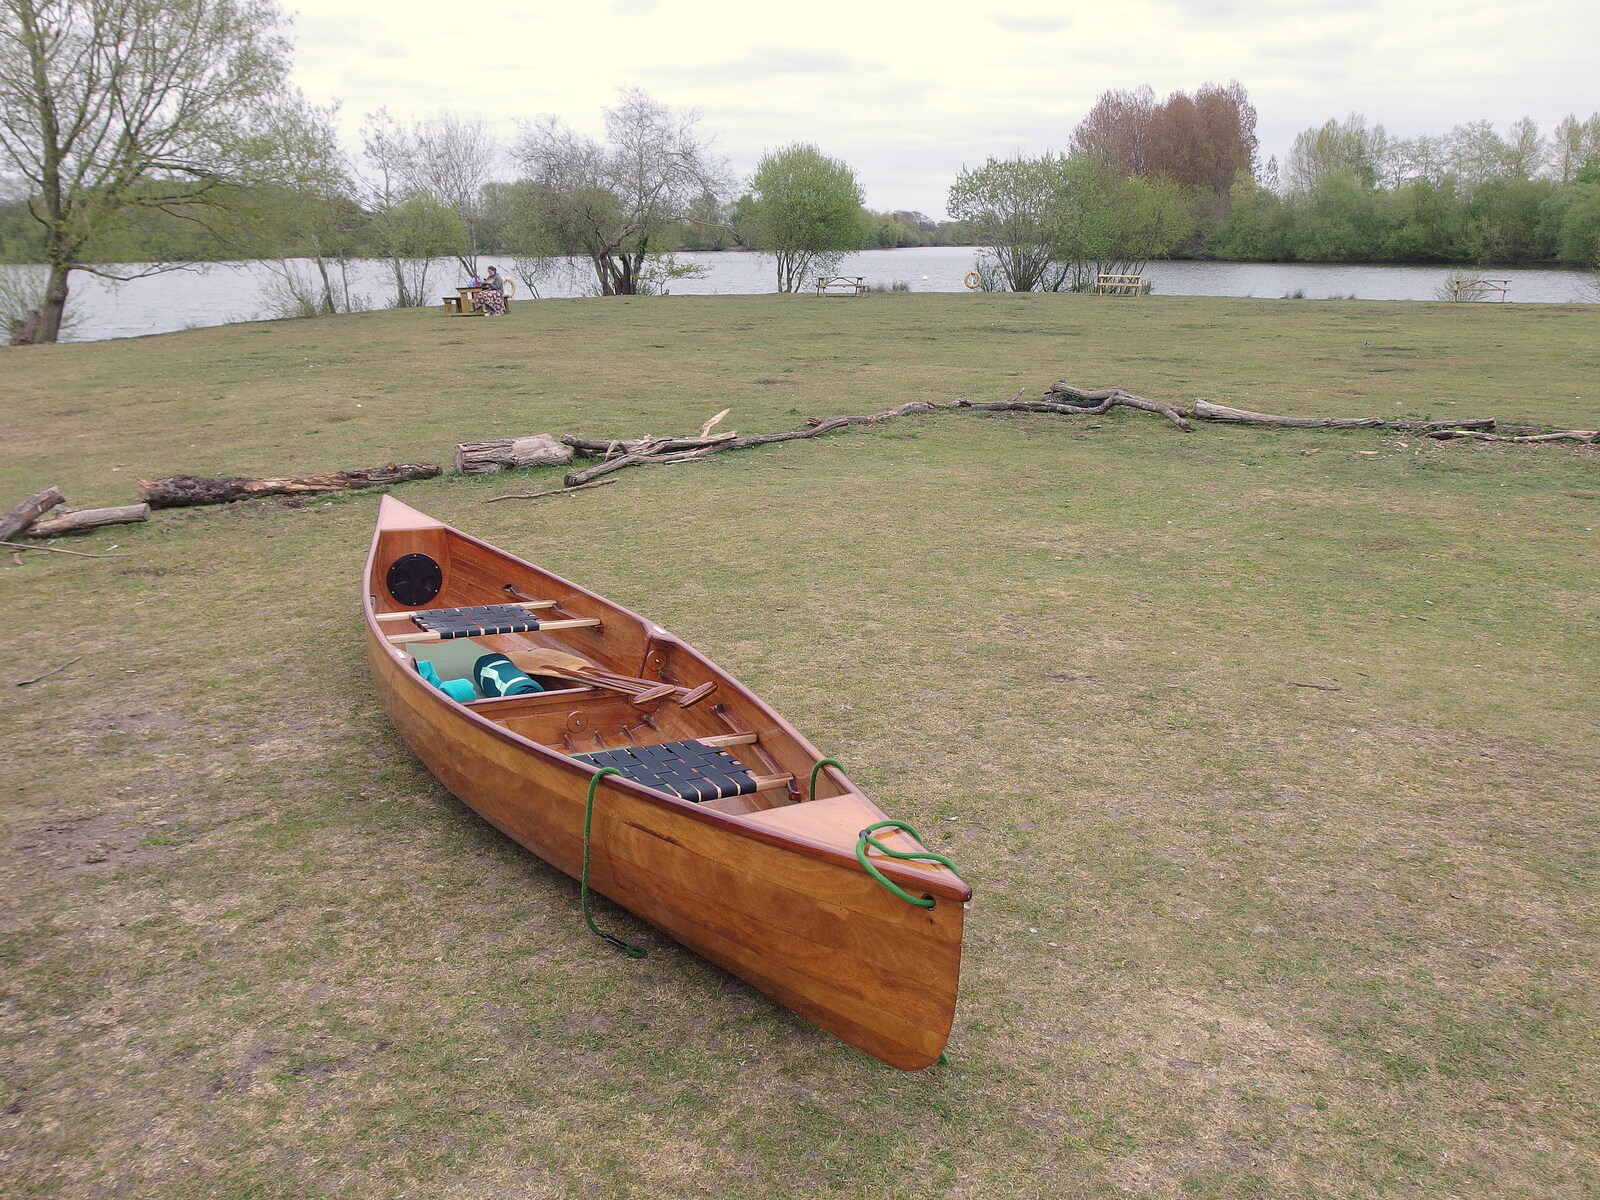 The Canoe's First Outing, Weybread Lake, Harleston - 1st May 2022: The canoe is down by the lake for the first time